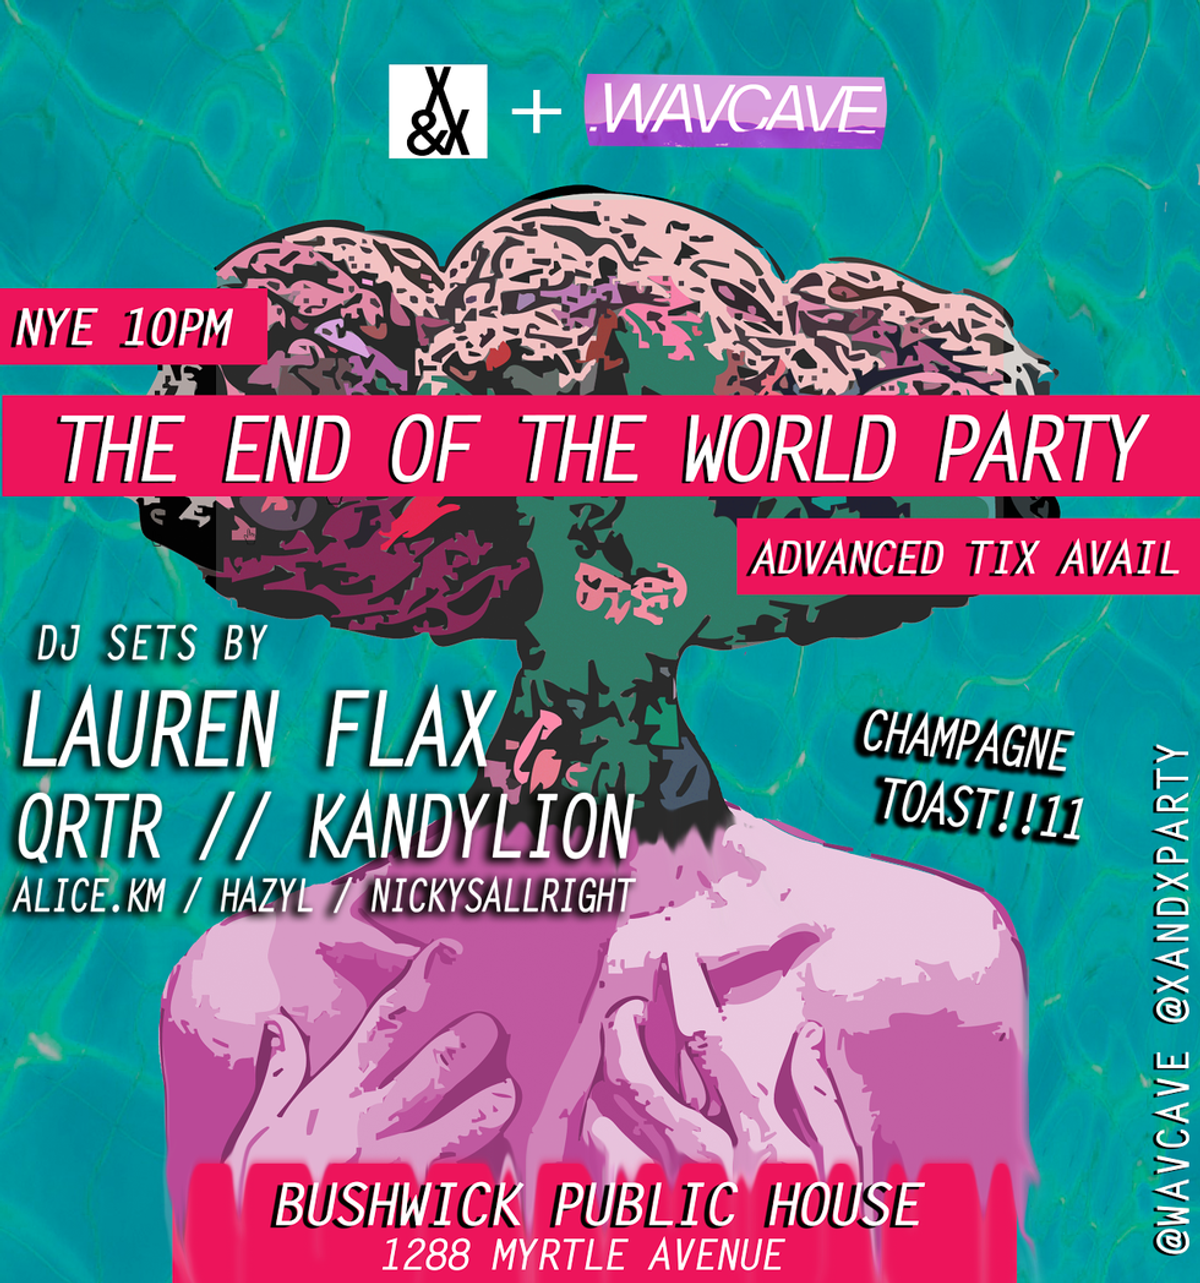 .WAVCAVE + x&x Present The End of the World